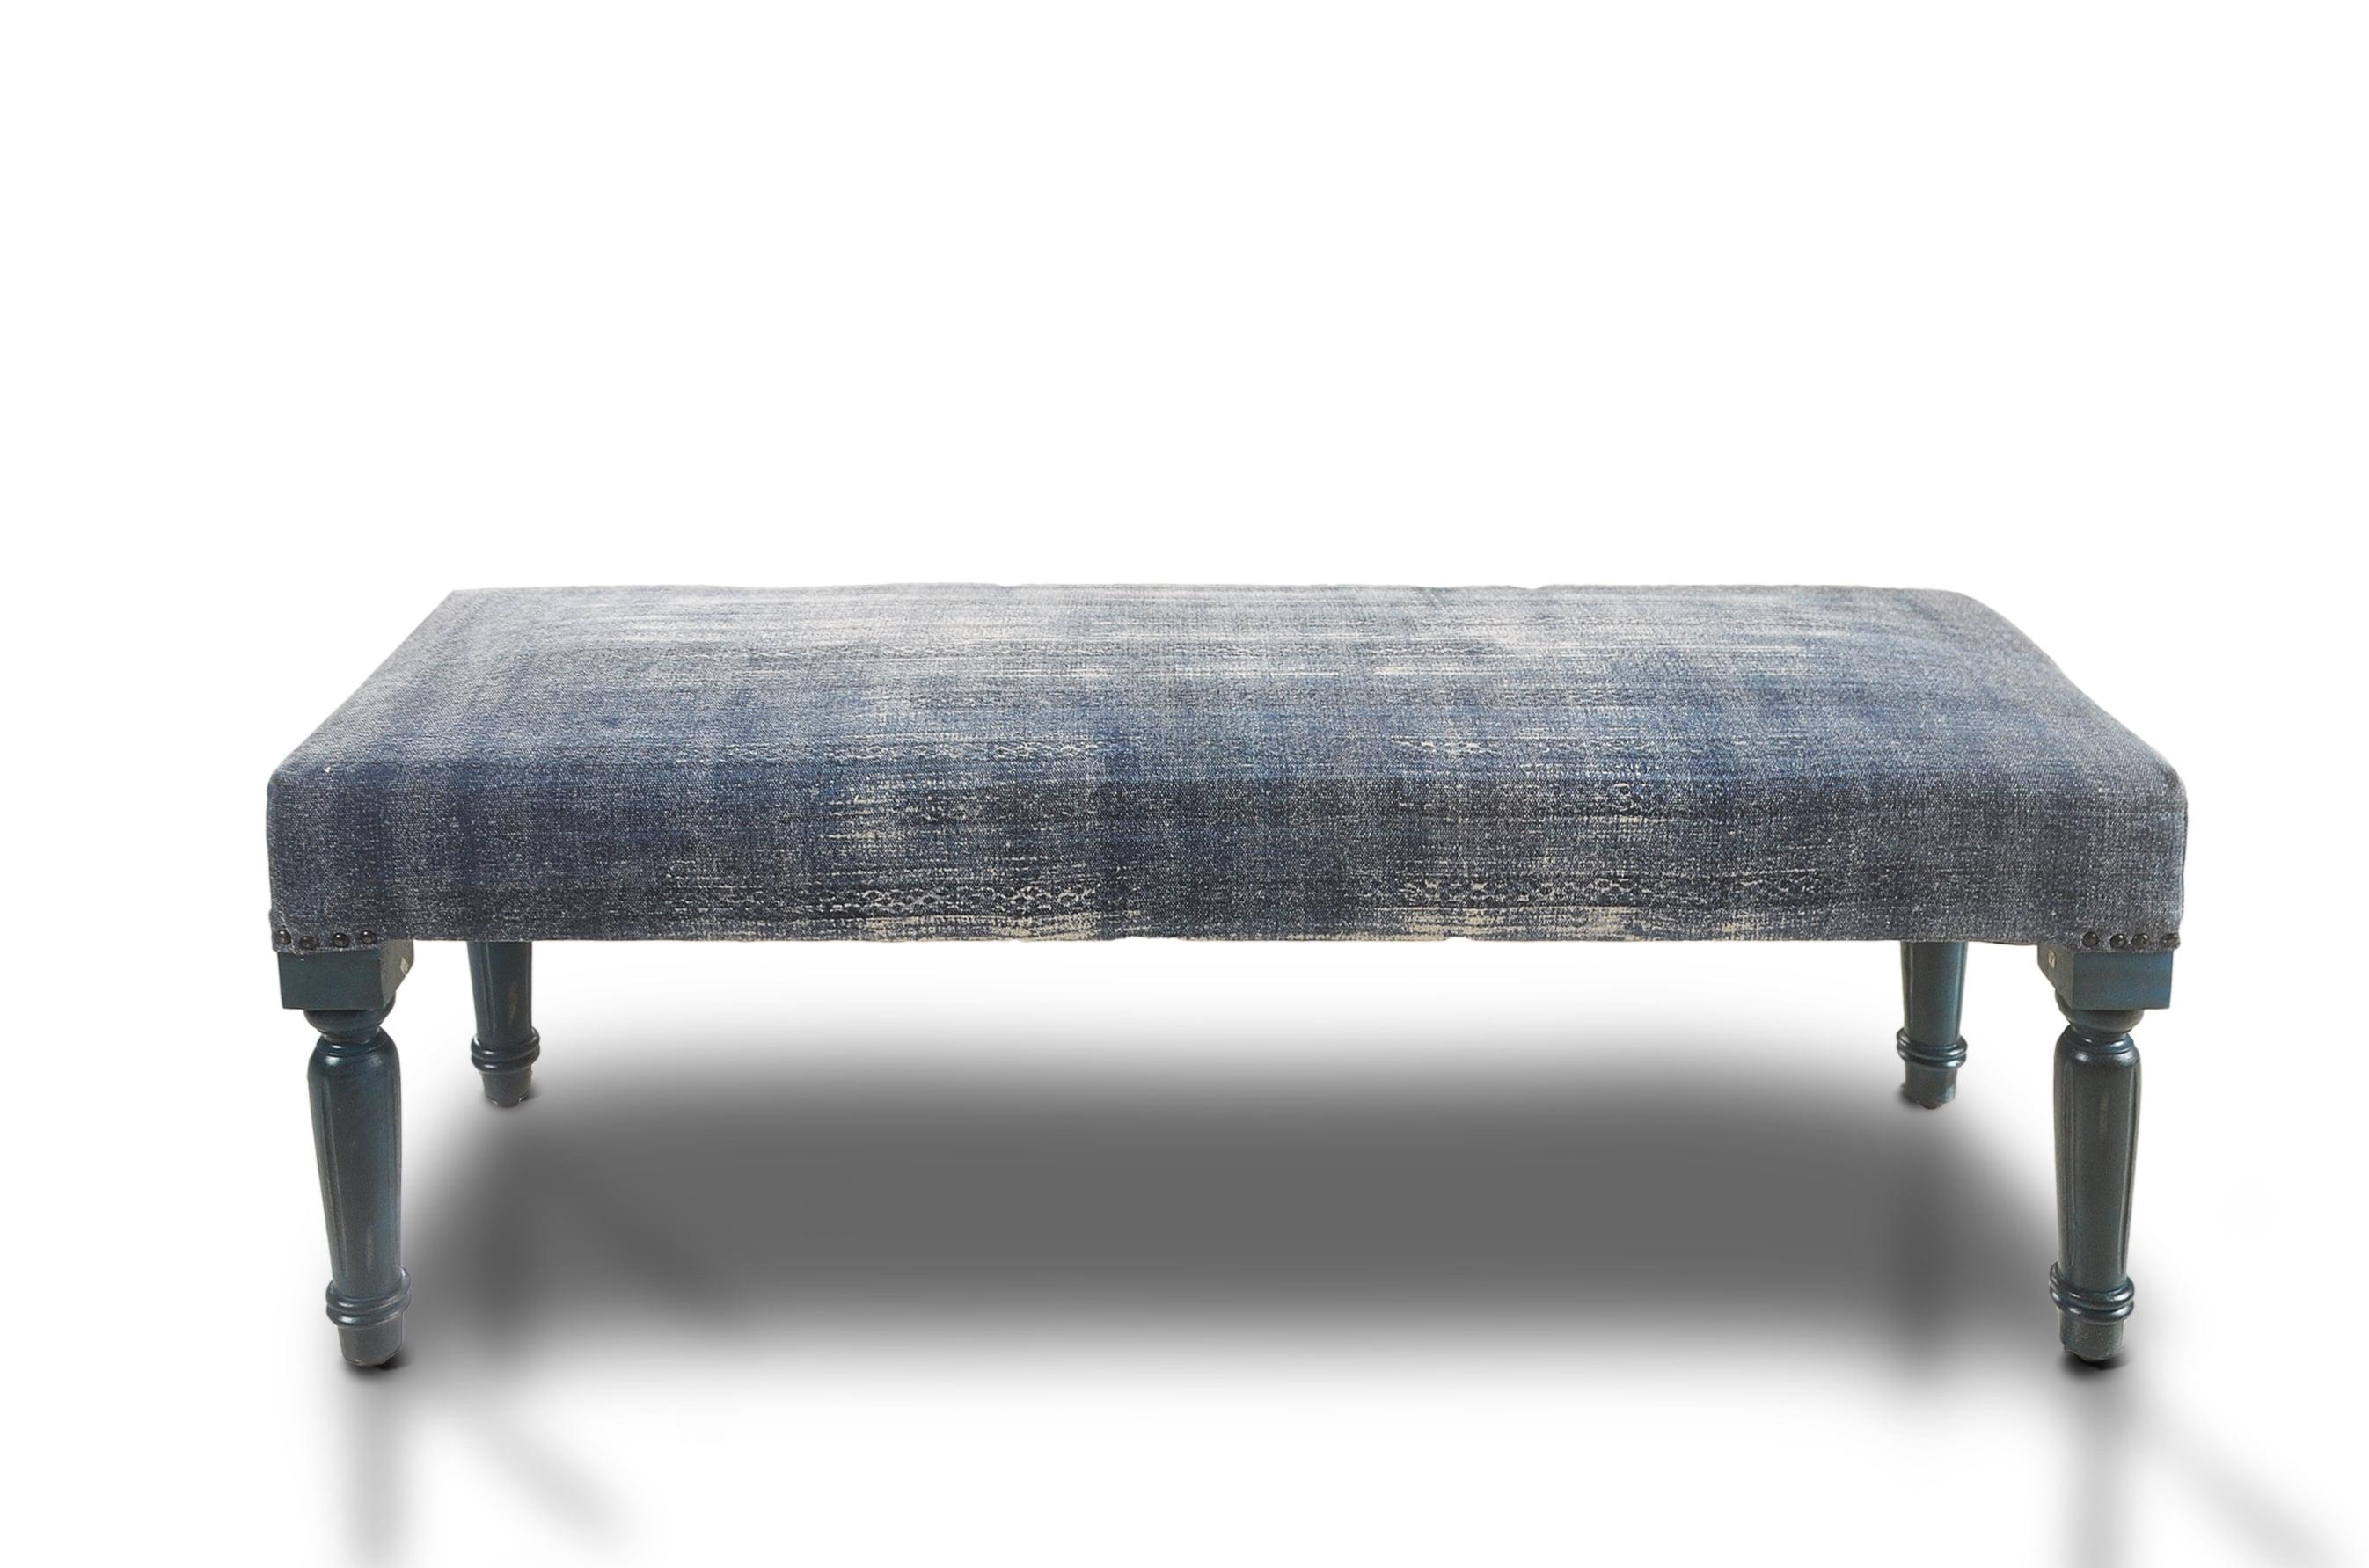 Distressed Antique Blue Cotton Bench with Stylish Legs